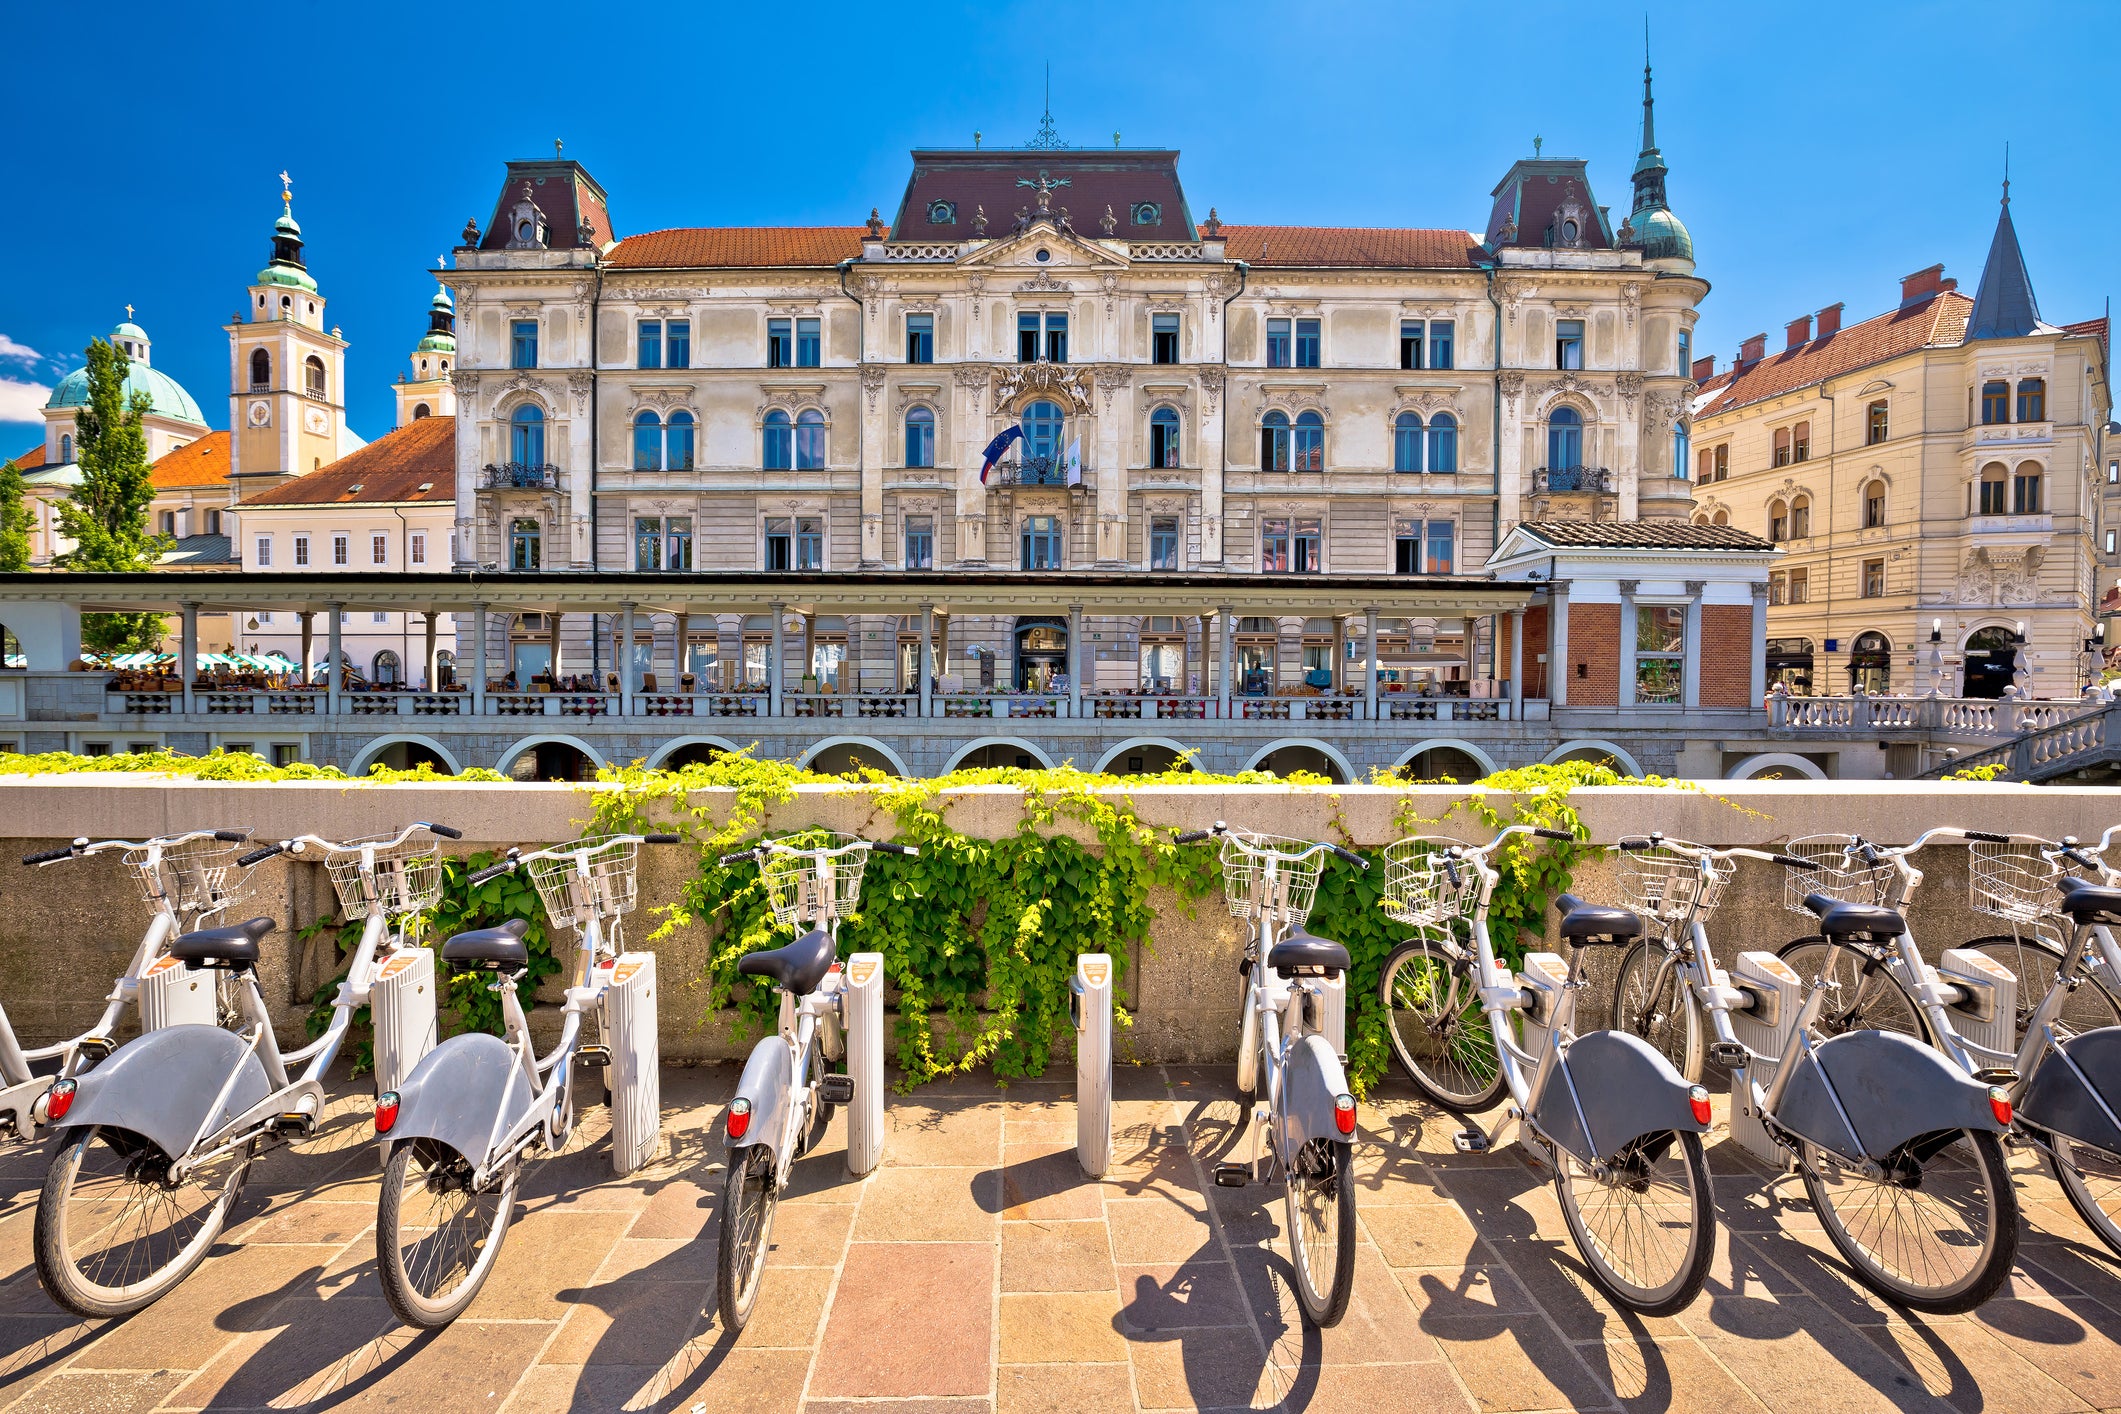 Ljubljana's mostly flat terrain makes it an ideal city to cycle around